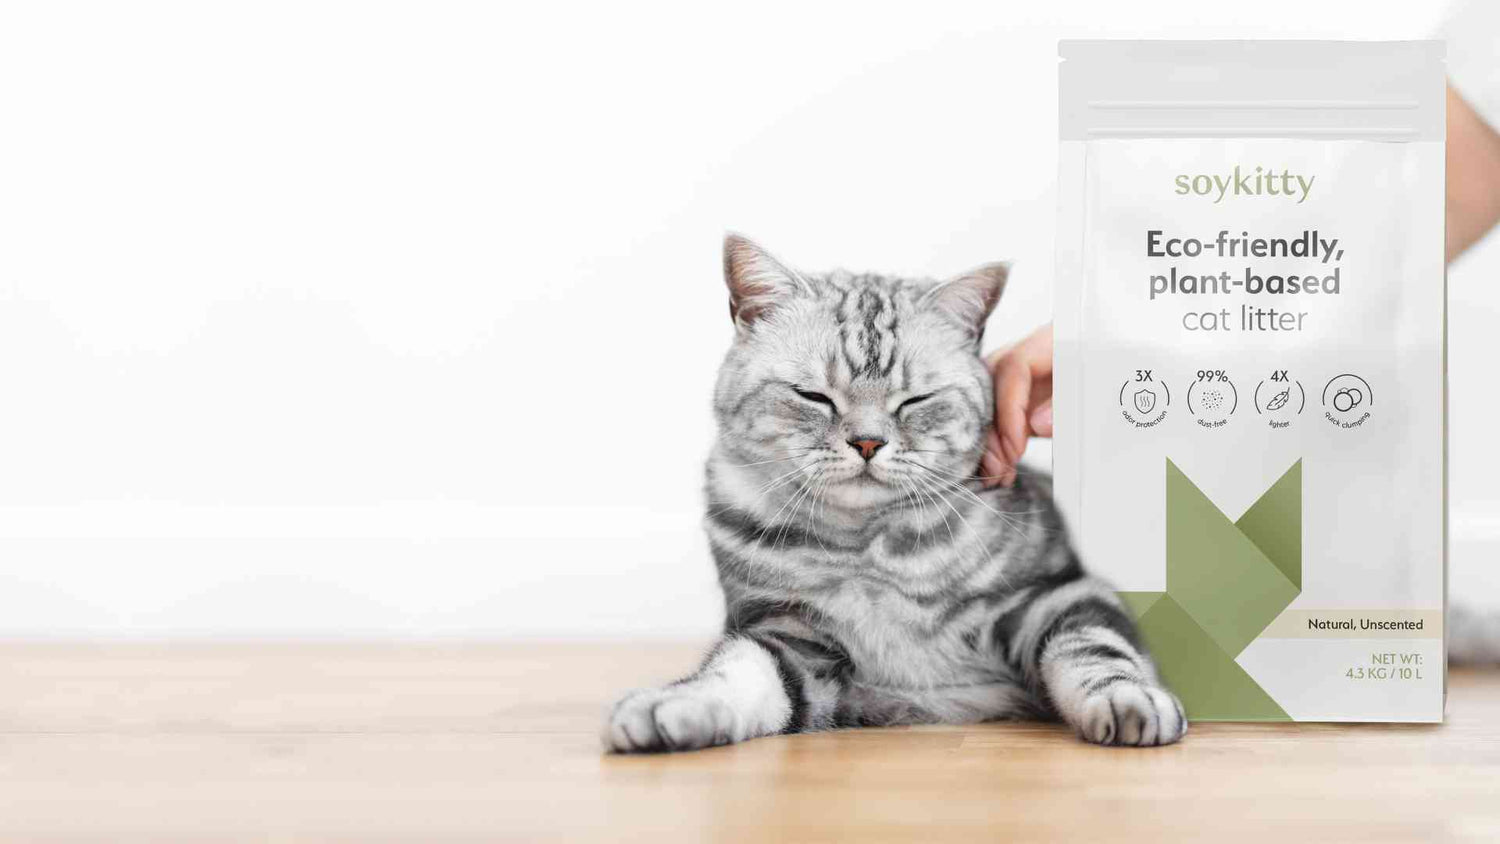 Grey tabby cat beside SoyKitty eco-friendly cat litter package, highlighting features like odor control, dust-free, lightweight, and high absorption, on a white background